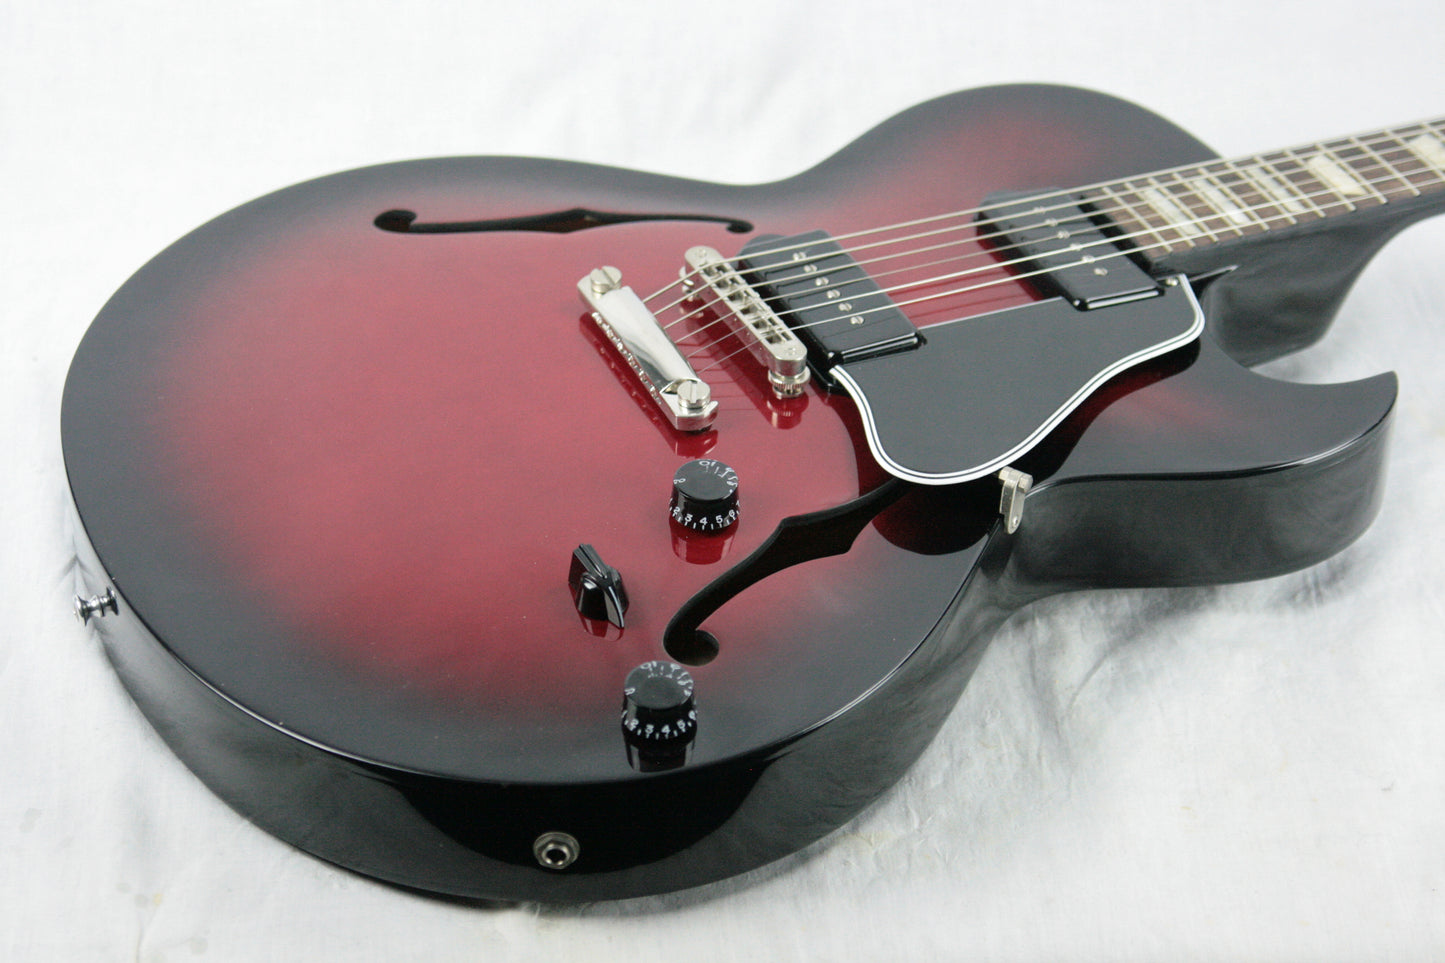 NOS SIGNED 2014 Gibson ES-137 Billie Joe Armstrong Black Cherry! Limited Edition AUTOGRAPHED